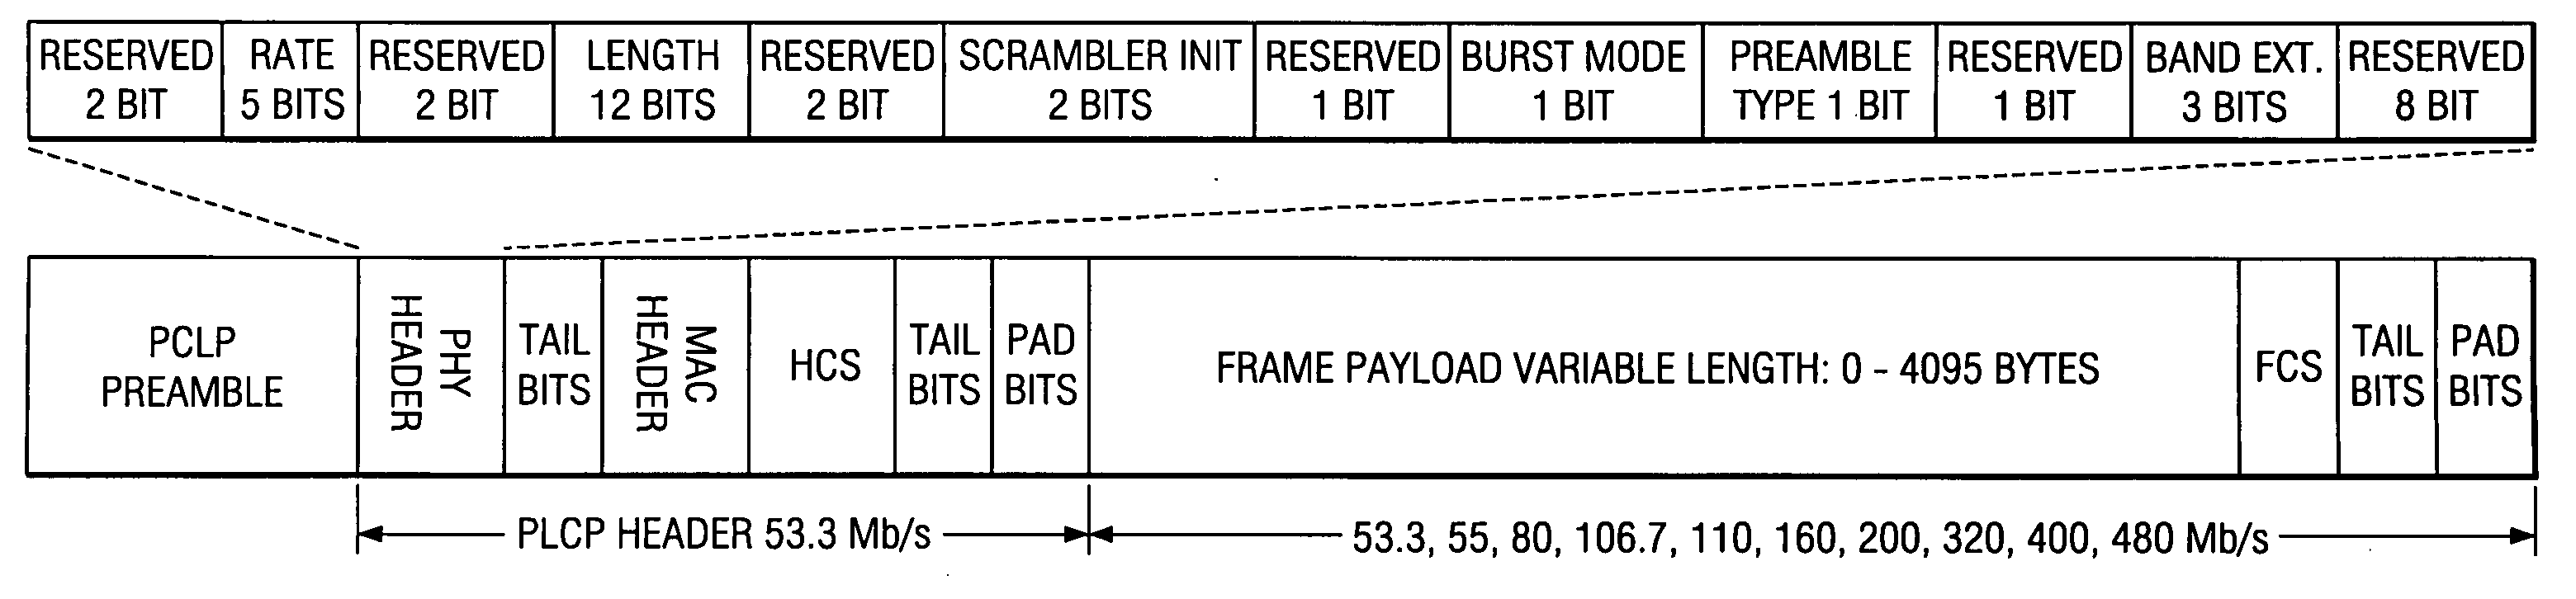 Enhancement to the multi-band OFDM physical layer